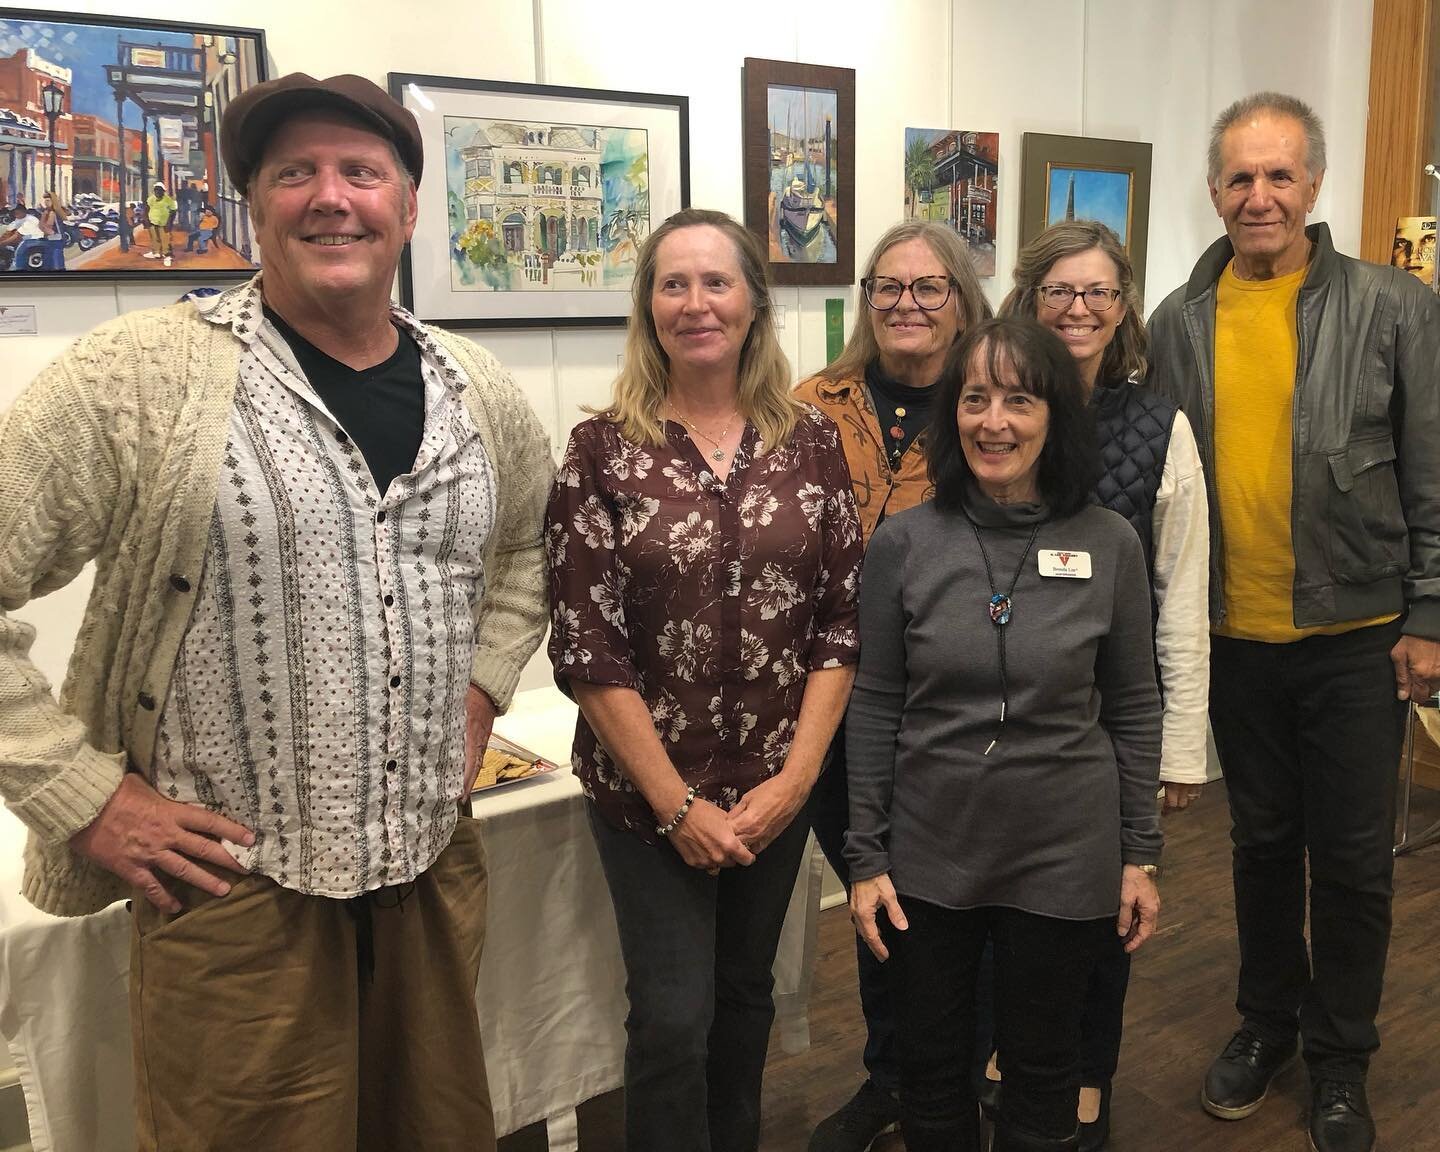 Thanks to all who came to the GLee Gallery for the judging and reception for the 10th annual Brushes in the Beach Plein Air painting competition. From 40 entrees juror Ebrahim Amin picked the finalist which will be on view and for sale till November 